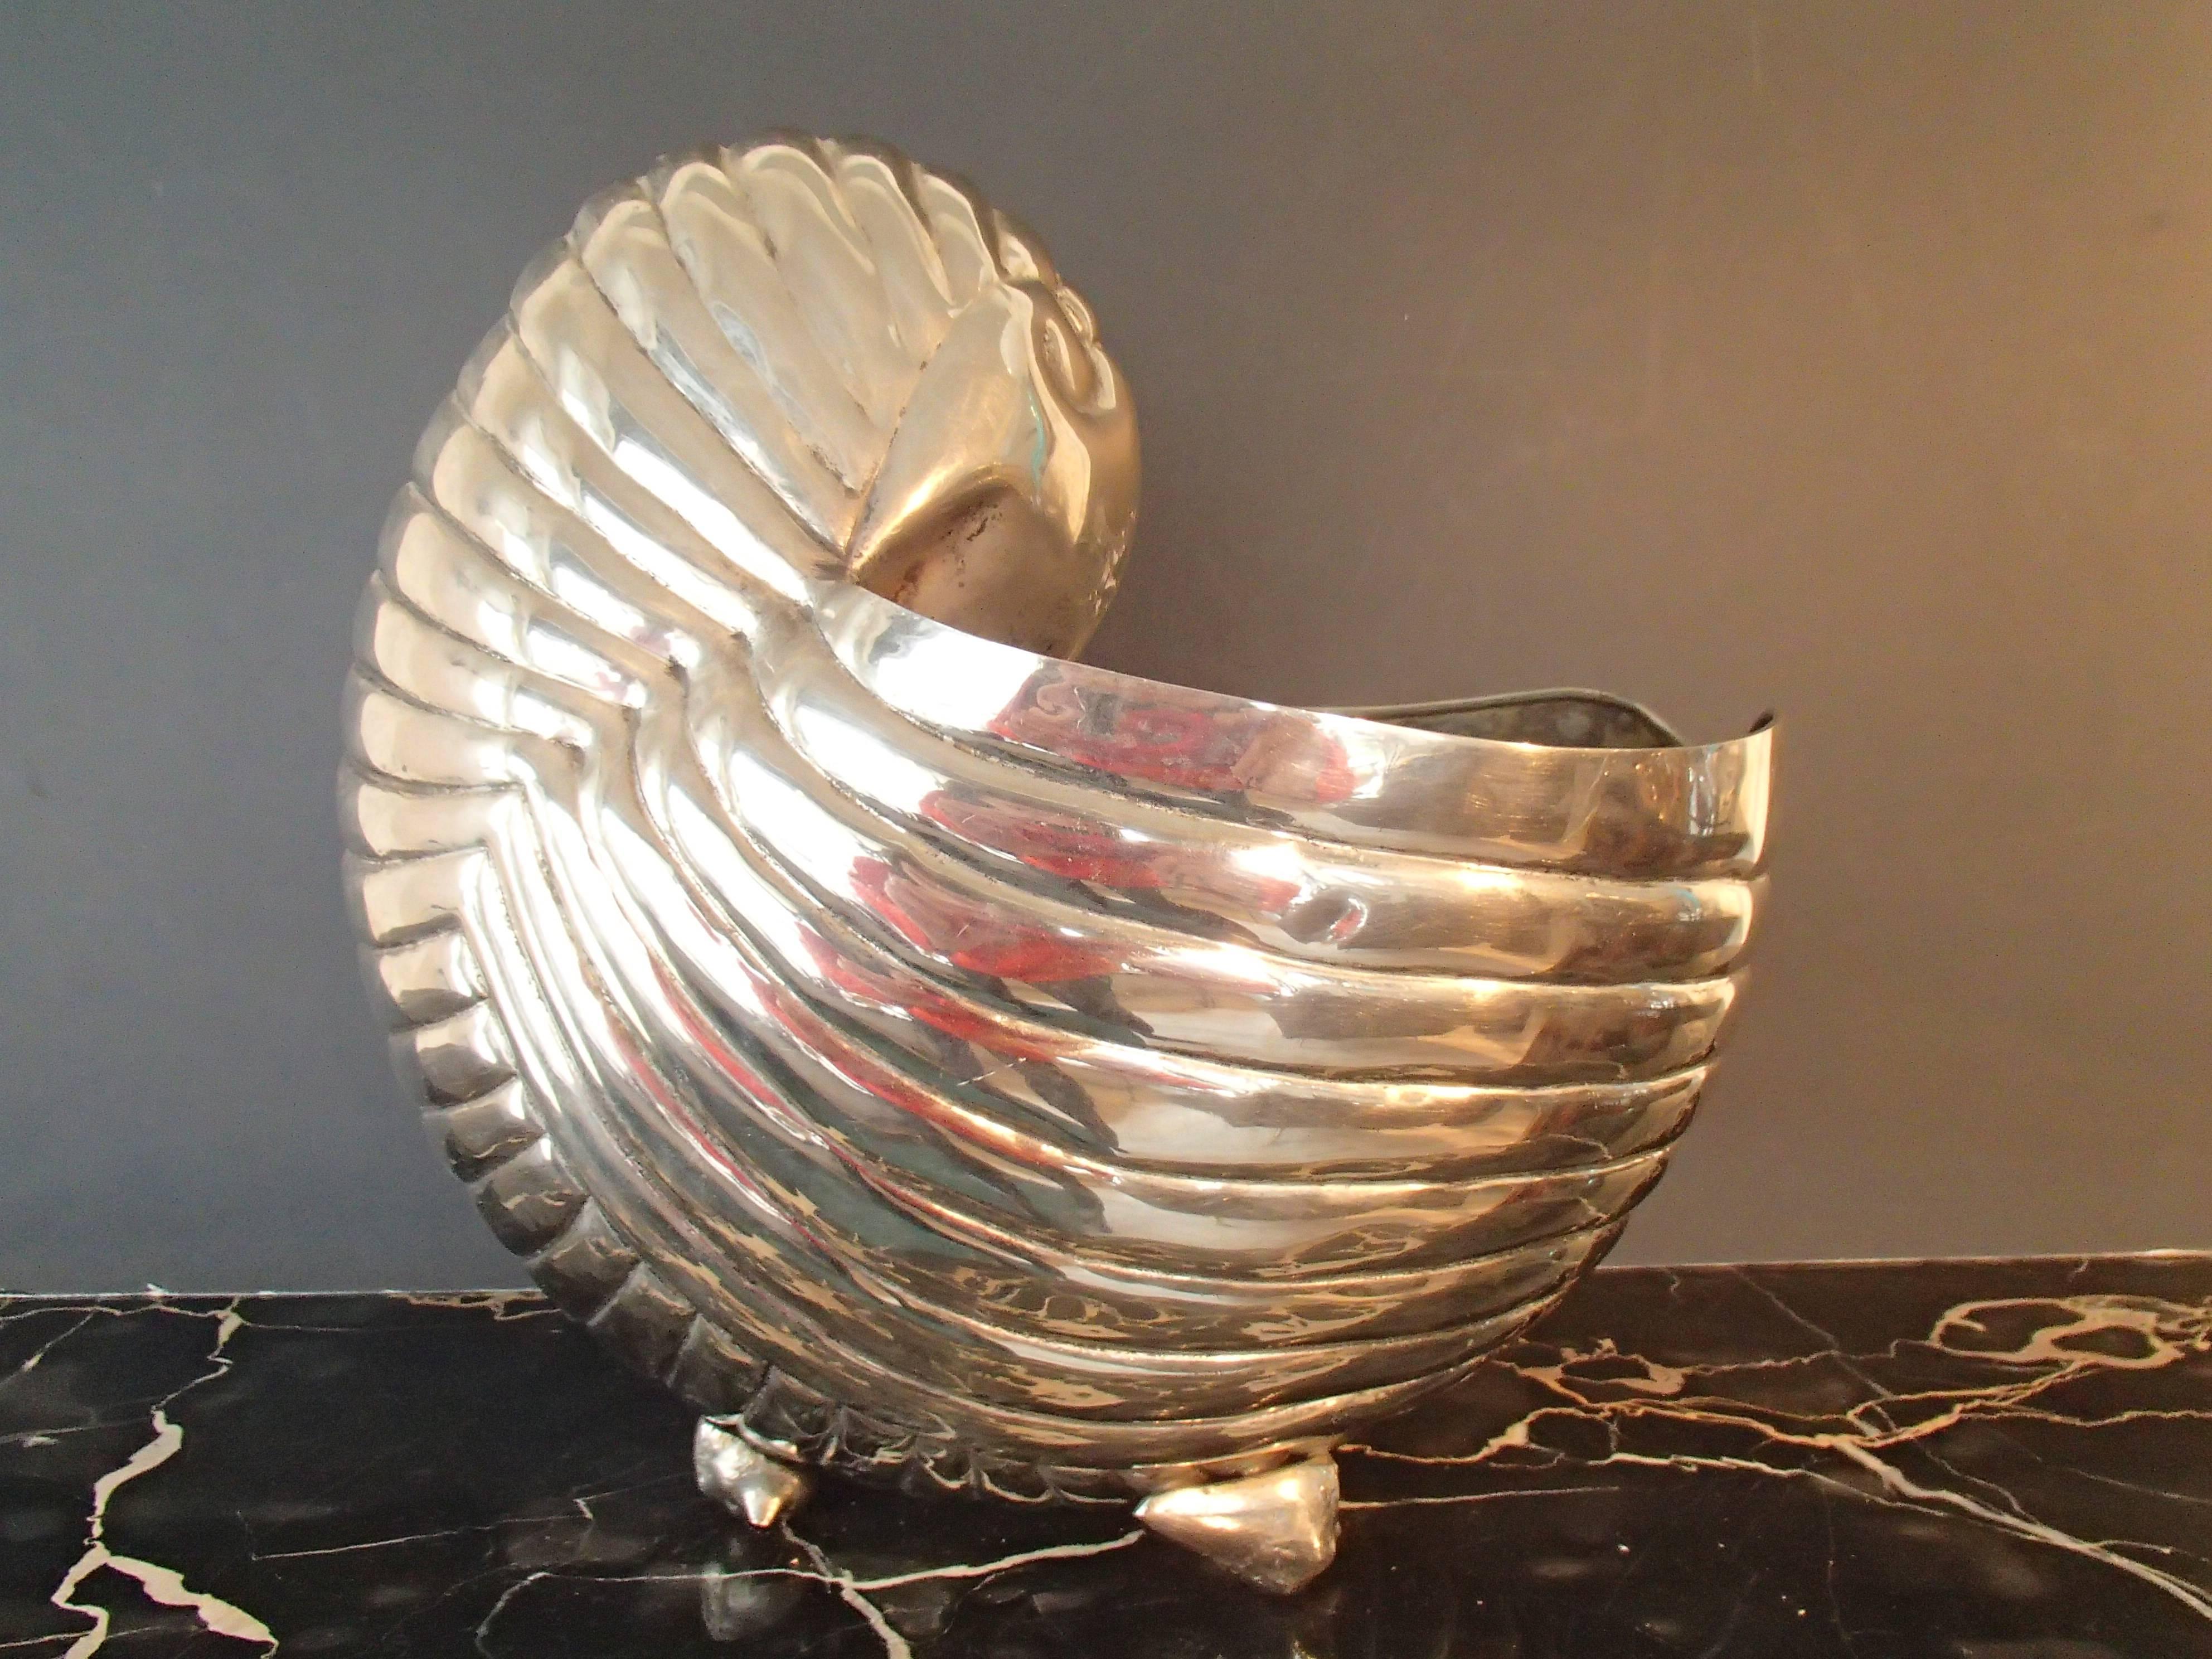 French Modern Champagne or Vine Cooler like a Shell Seen in 